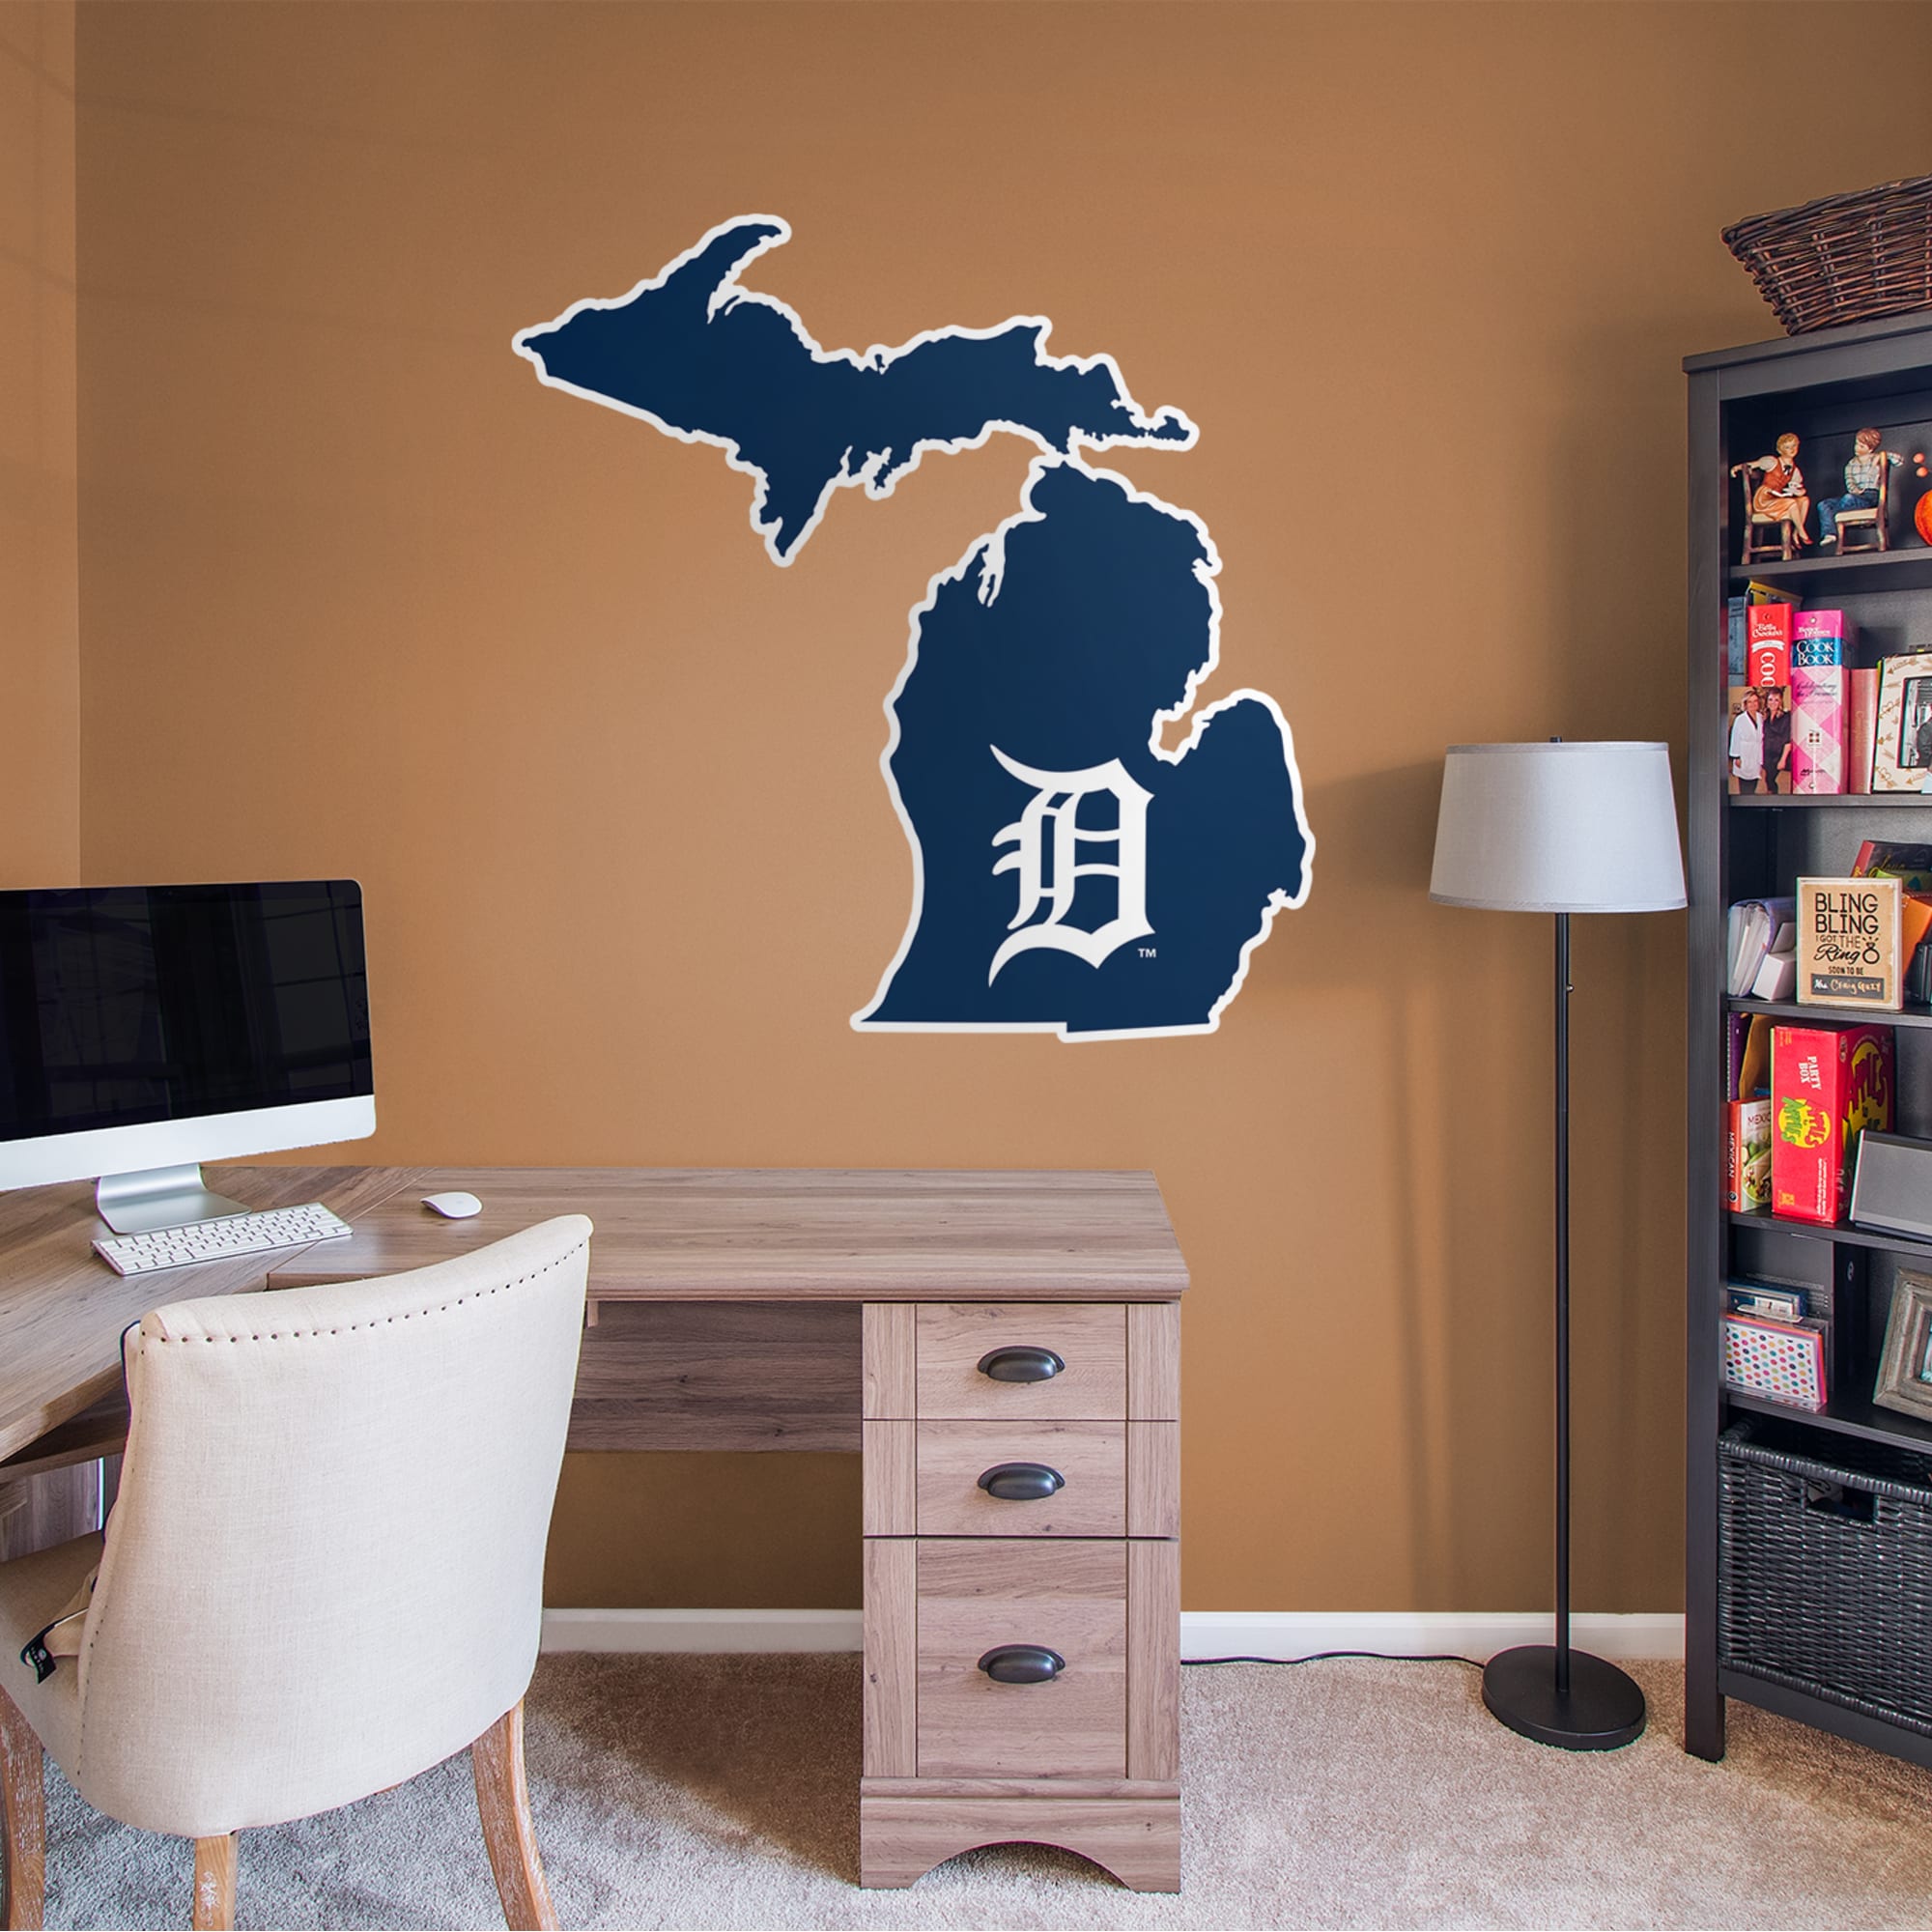 Detroit Tigers: State of Michigan - Officially Licensed MLB Removable Wall Decal 29.0"W x 51.0"H by Fathead | Vinyl